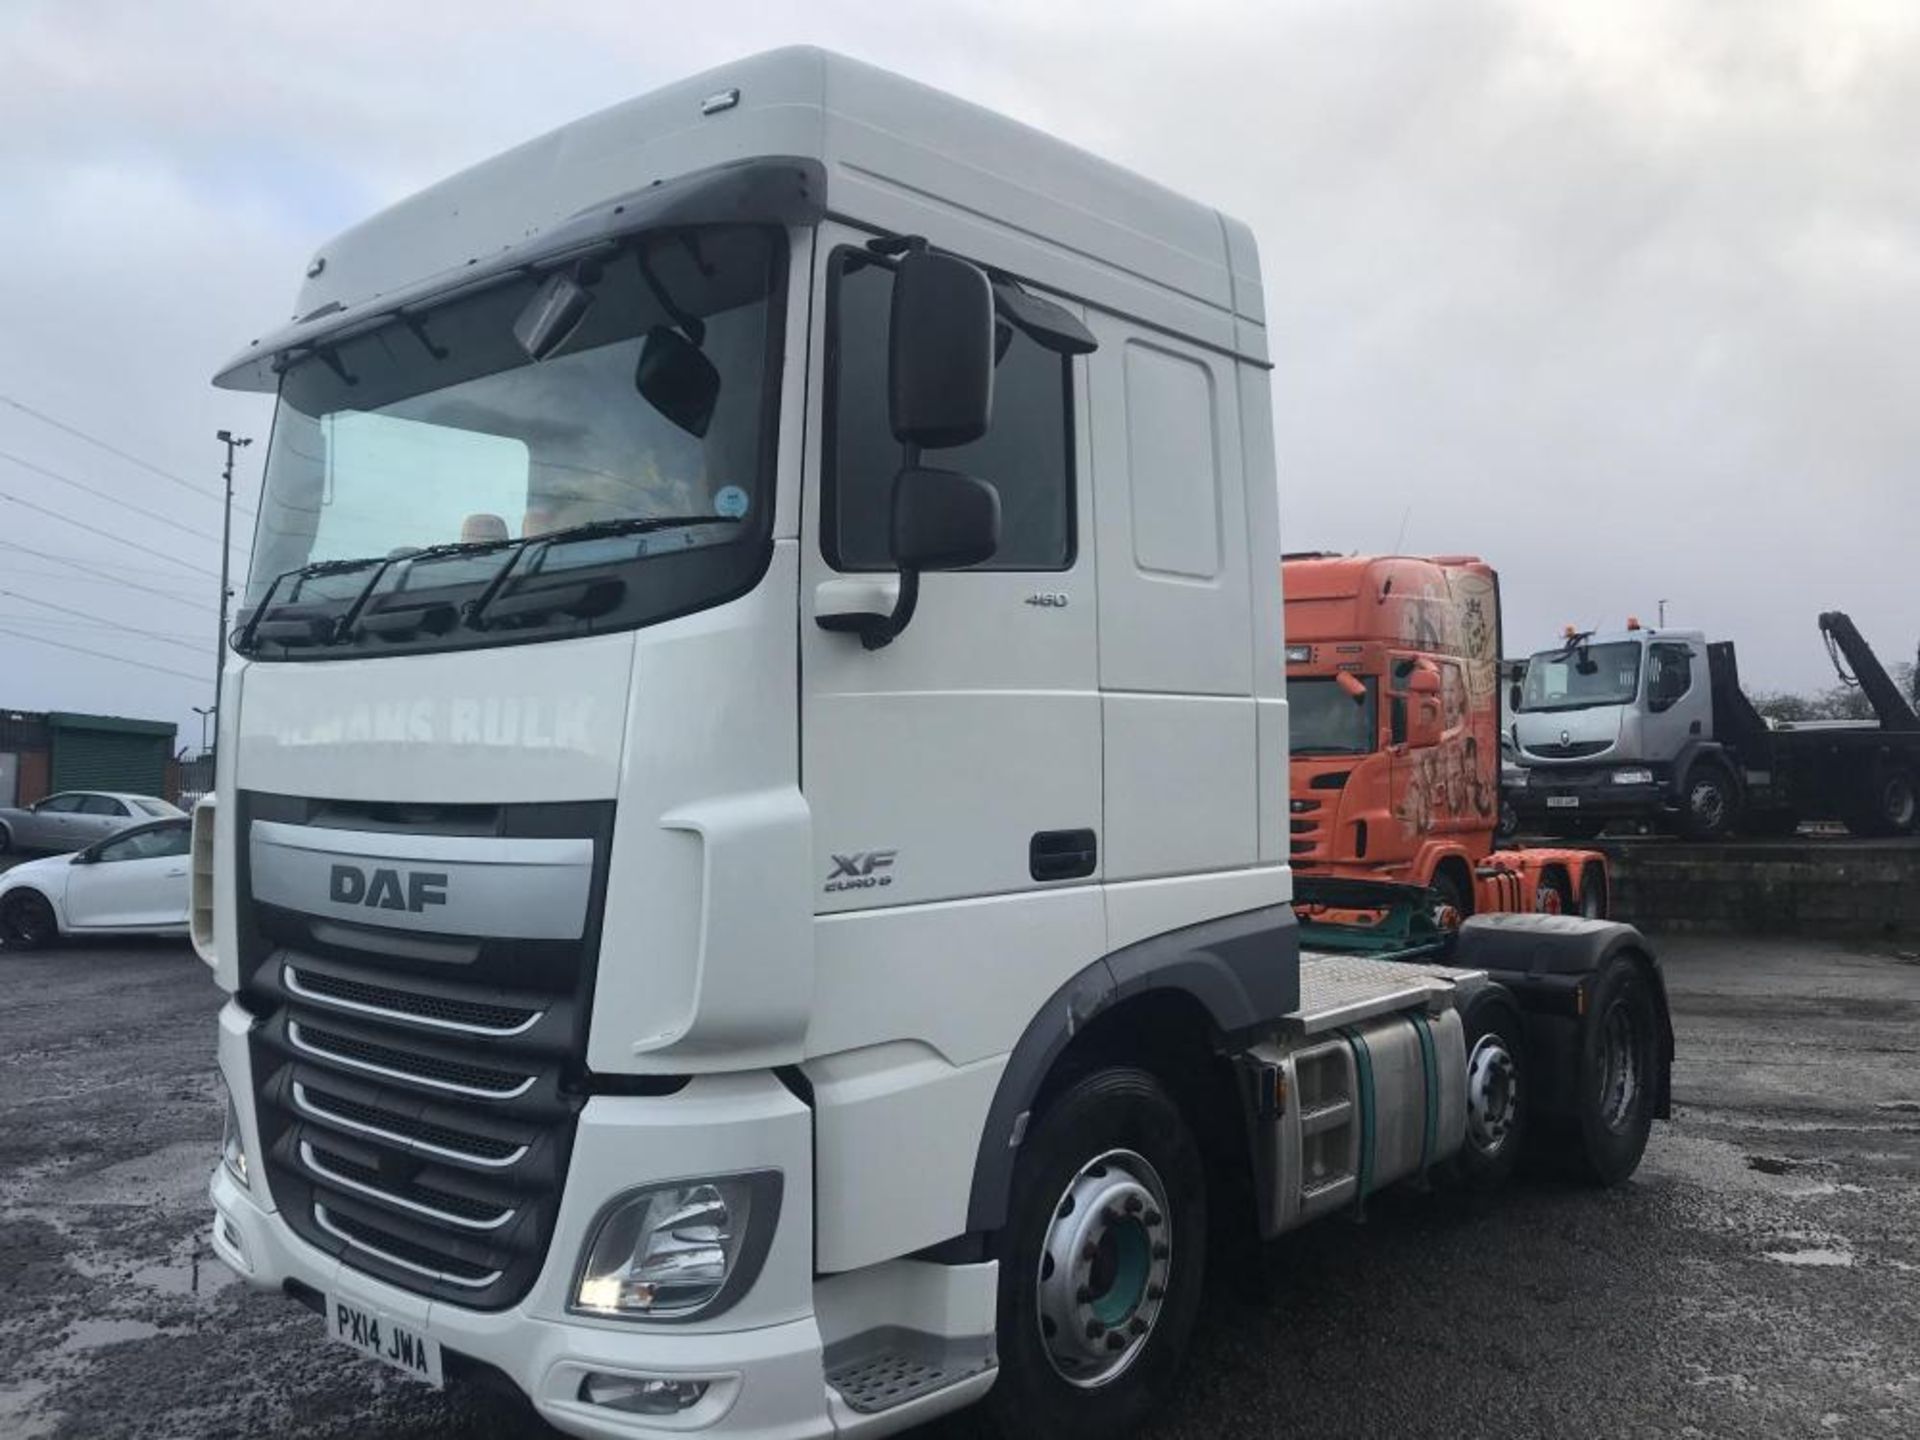 2014/14 REG DAF XF 105.460 6X2 TRACTOR UNIT MANUAL GEARBOX TIPPING GEAR EURO 6 *PLUS VAT* - Image 2 of 12